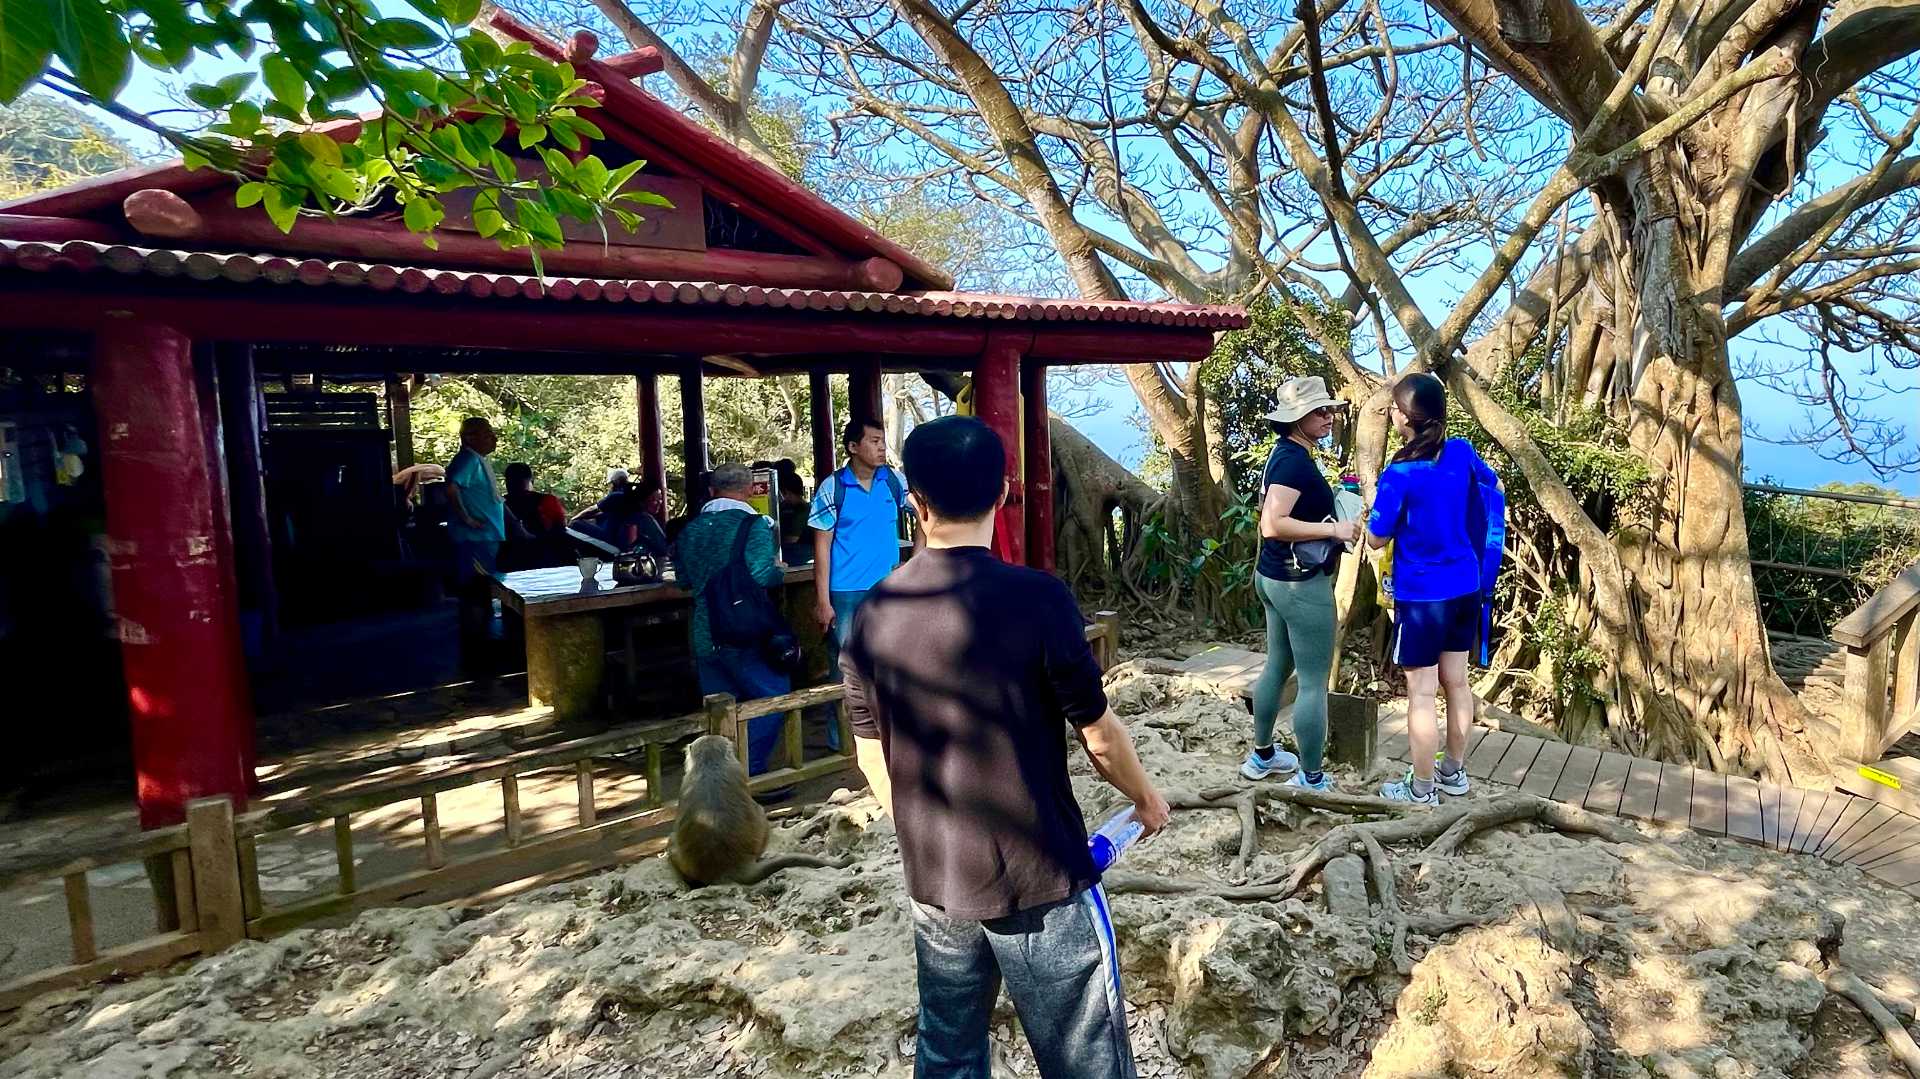 A mountaintop pavilion with people making tea inside. A bunch of people are gathered around, and one monkey is sitting watching.